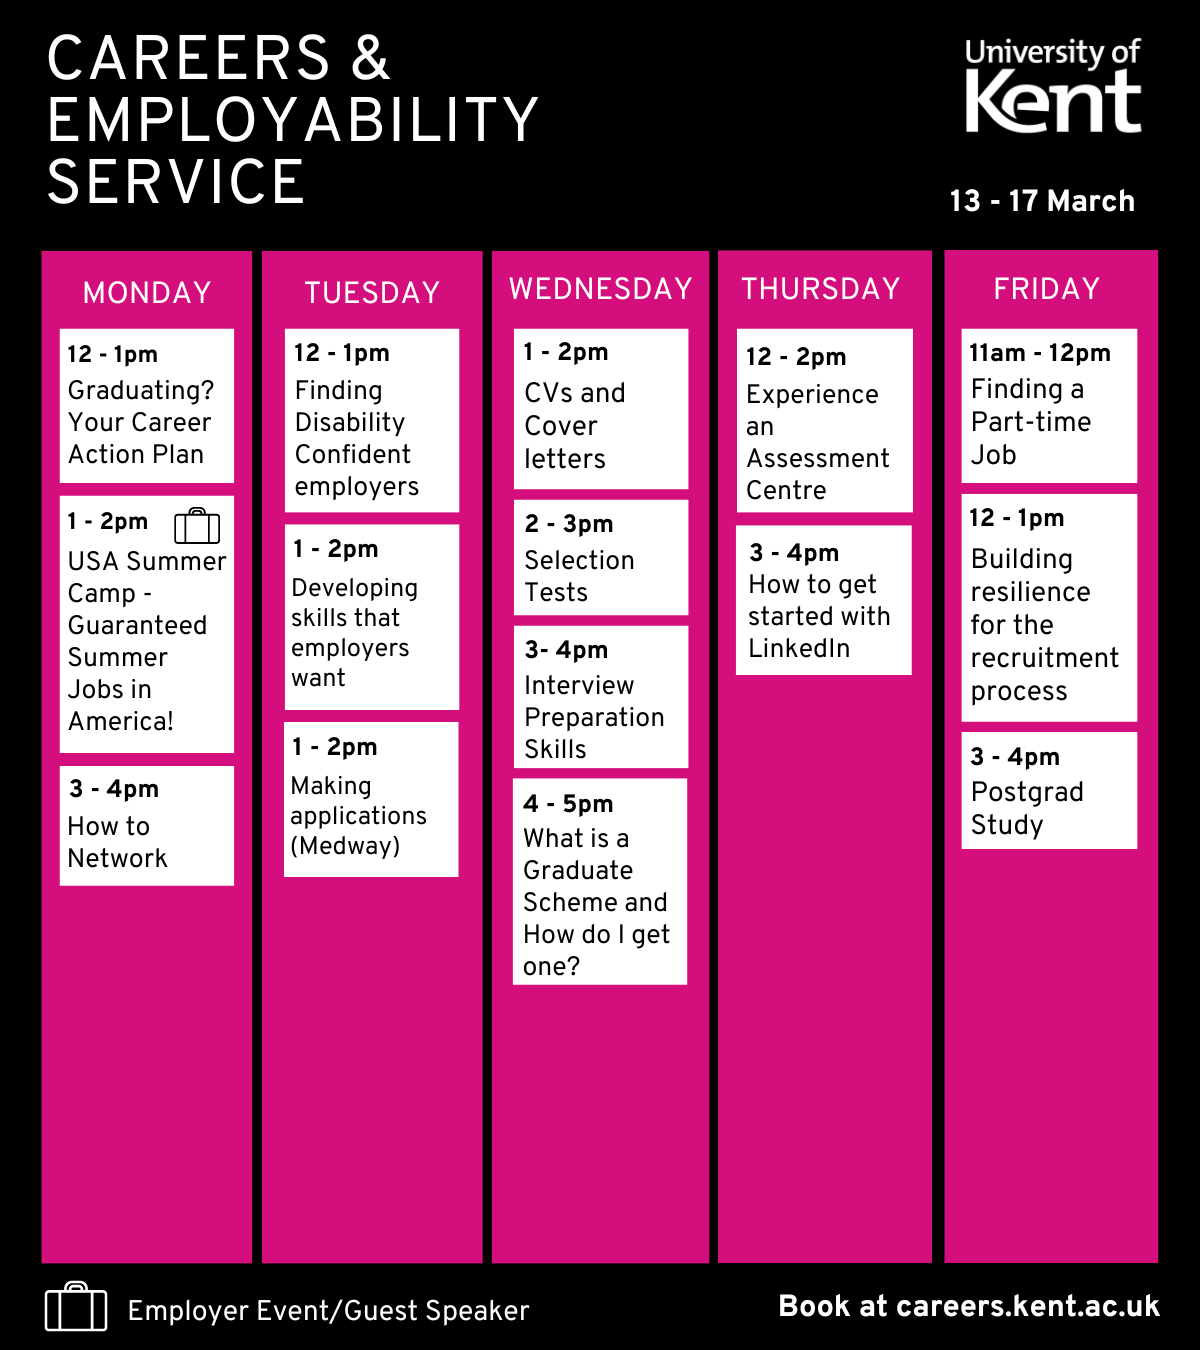 Careers events 13-17 March